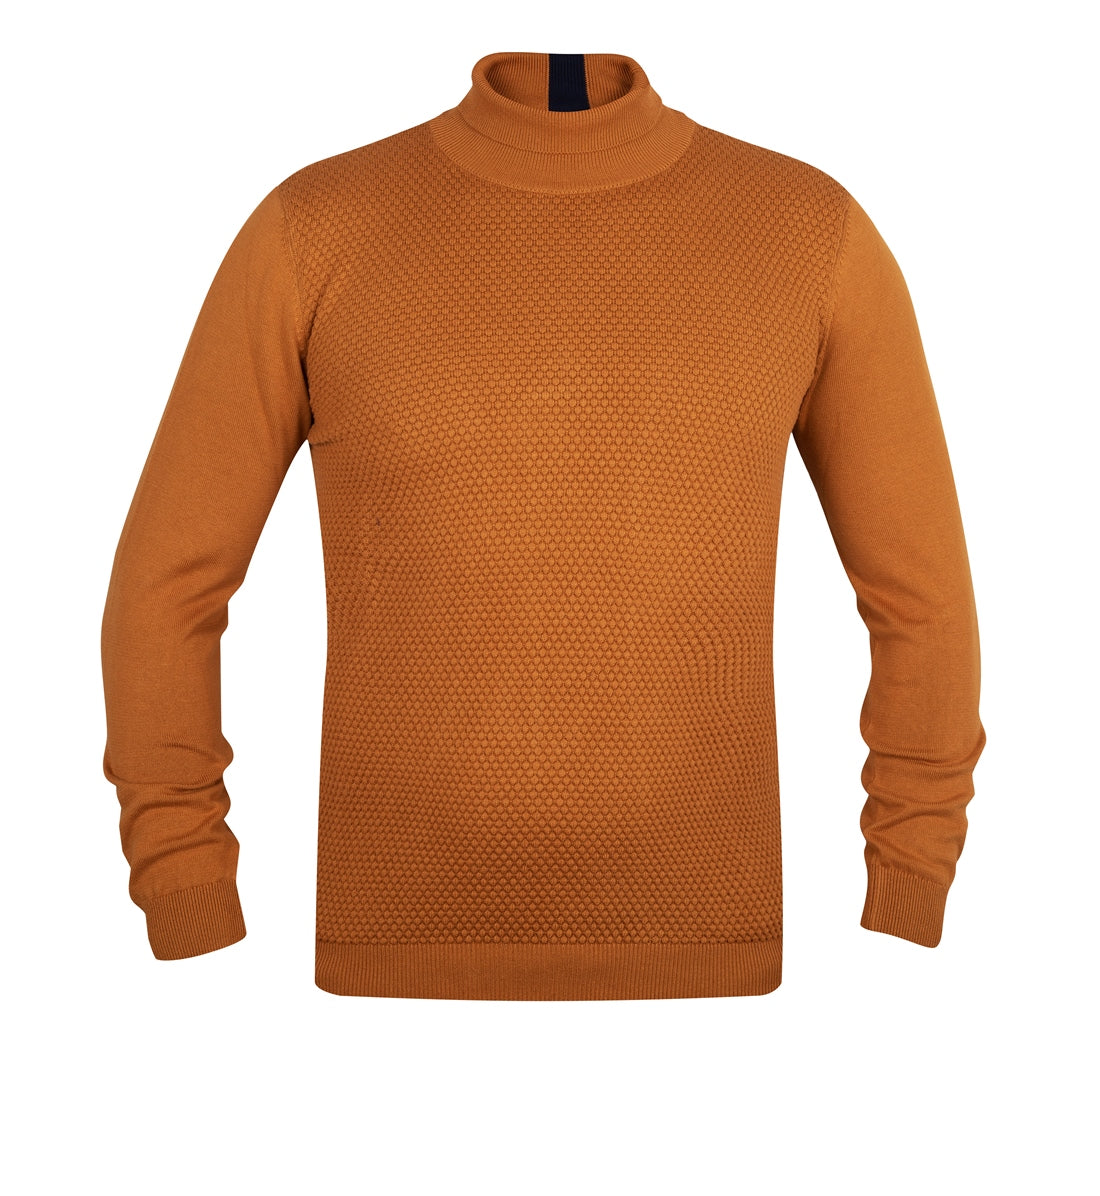 Cotton roll neck with jacquard front